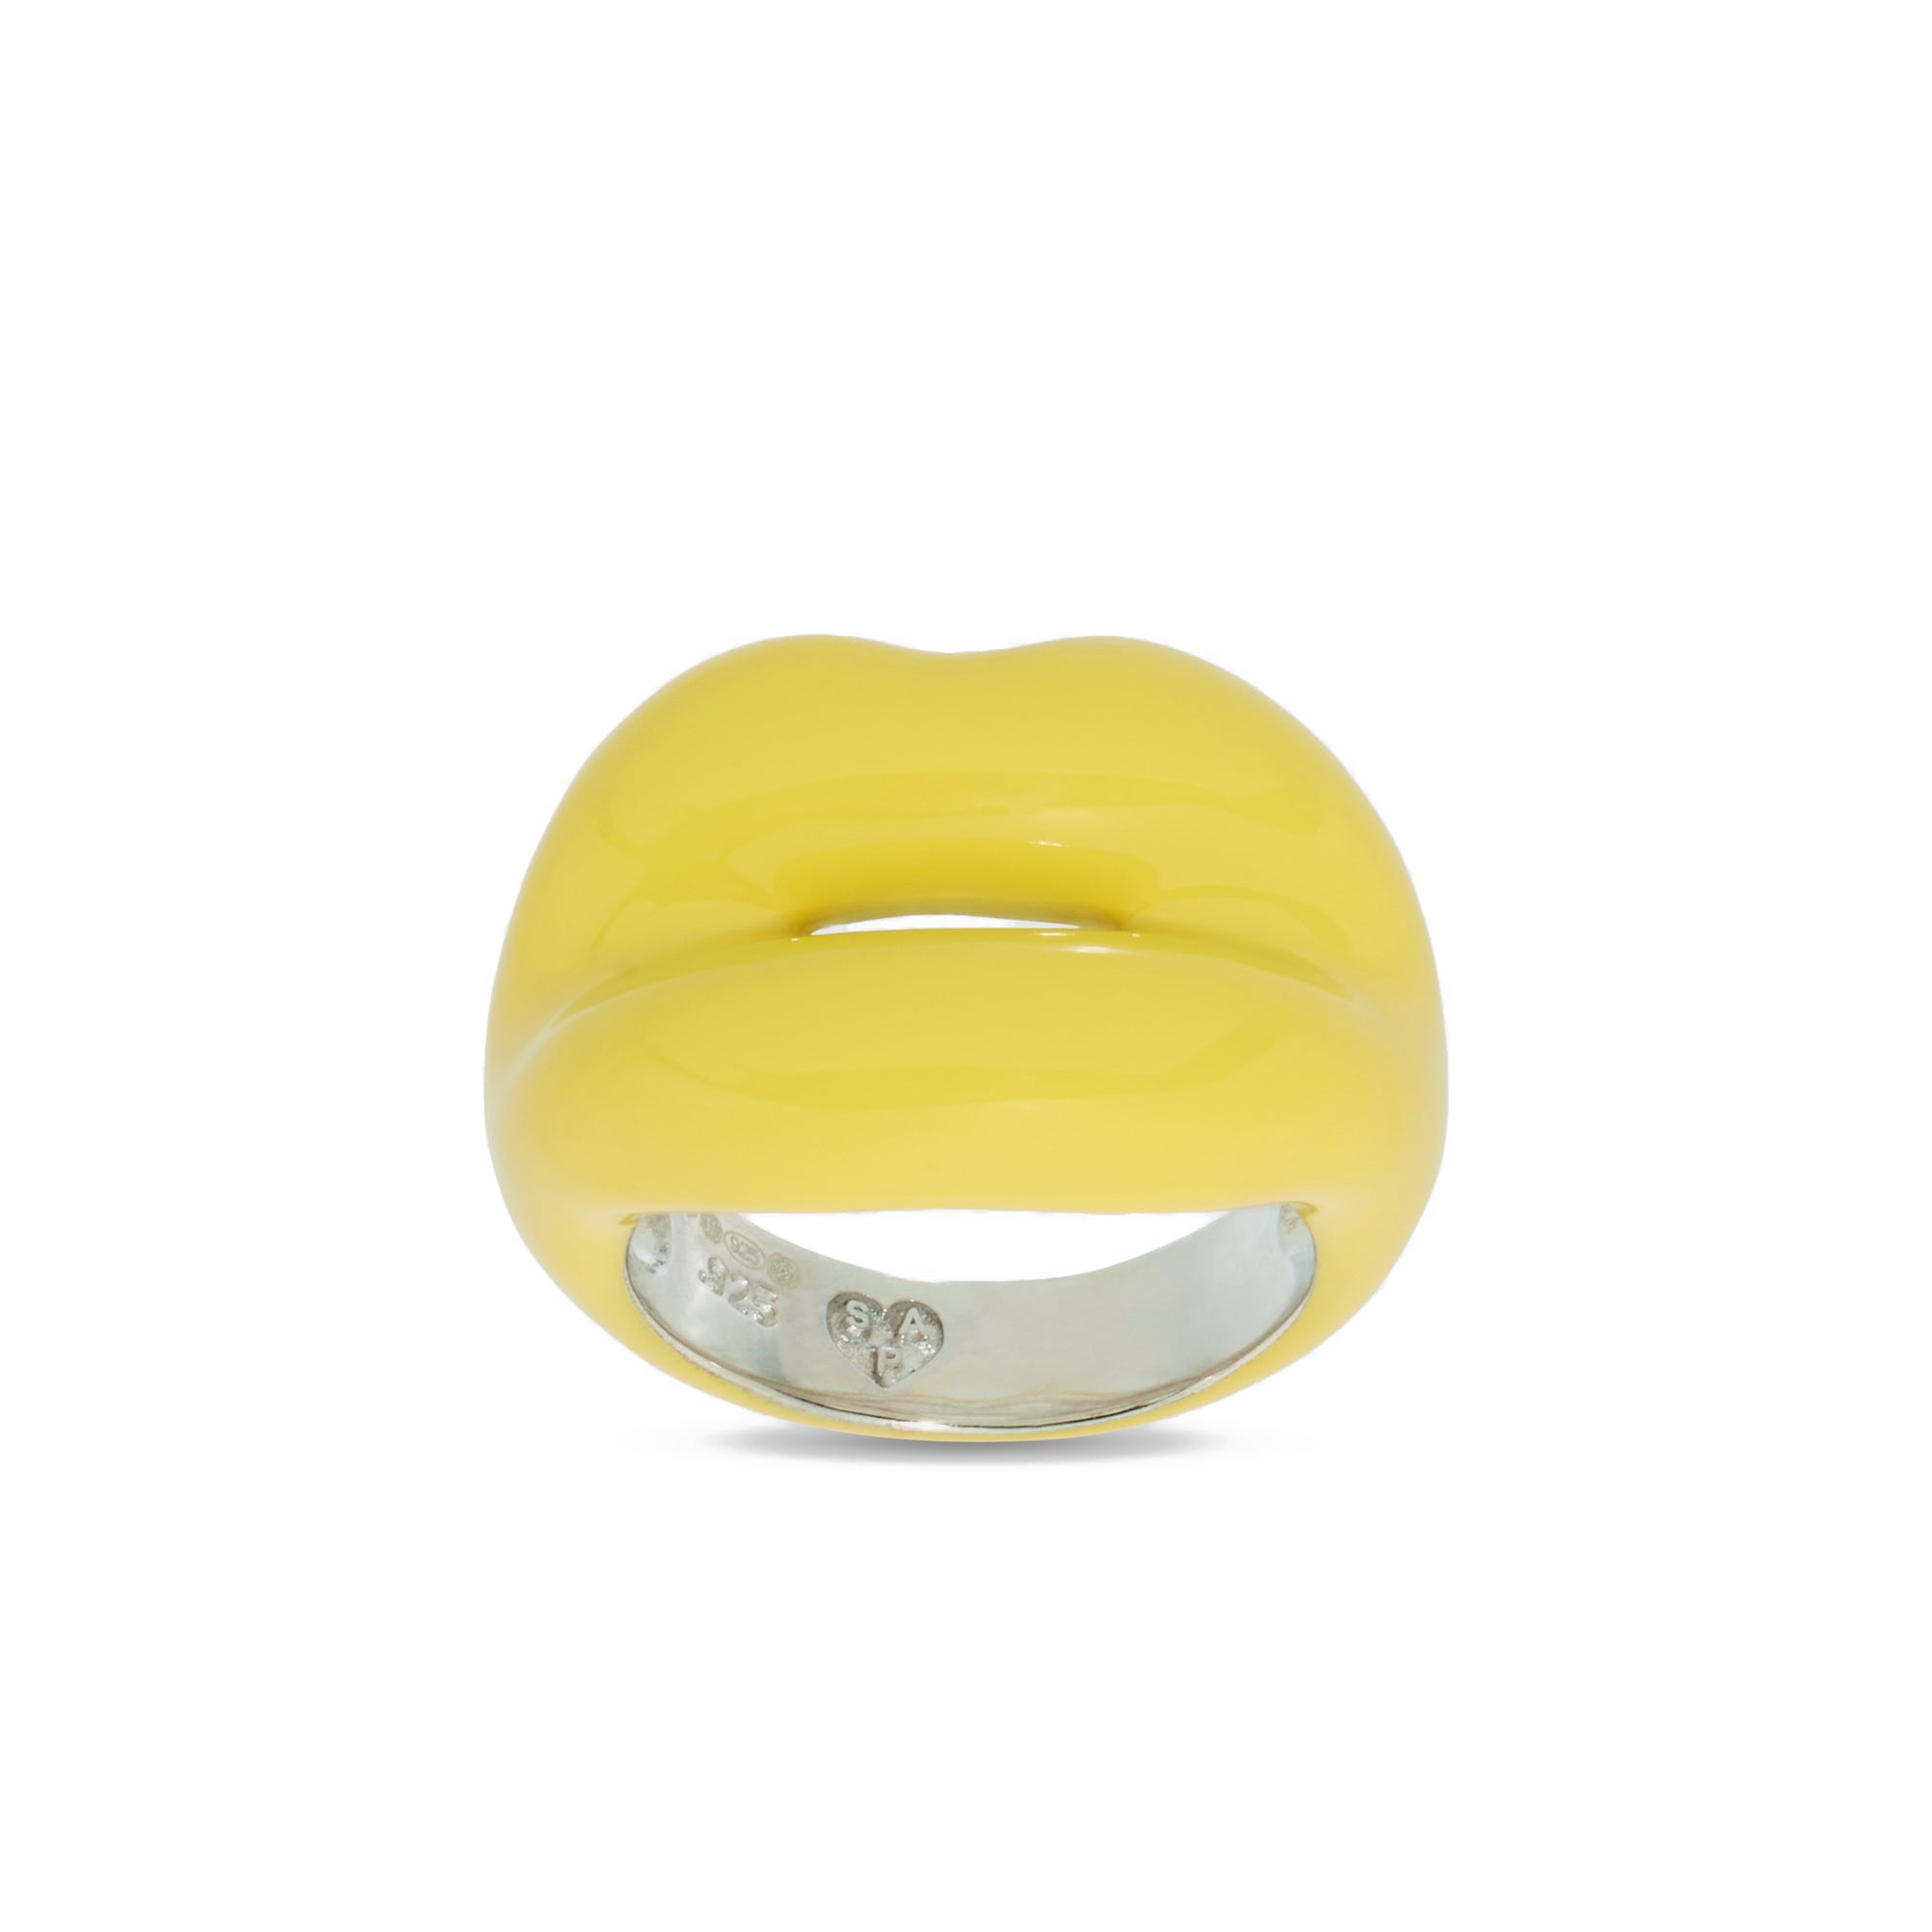 Solange - Hotlips Ring in Pastel Yellow view 2